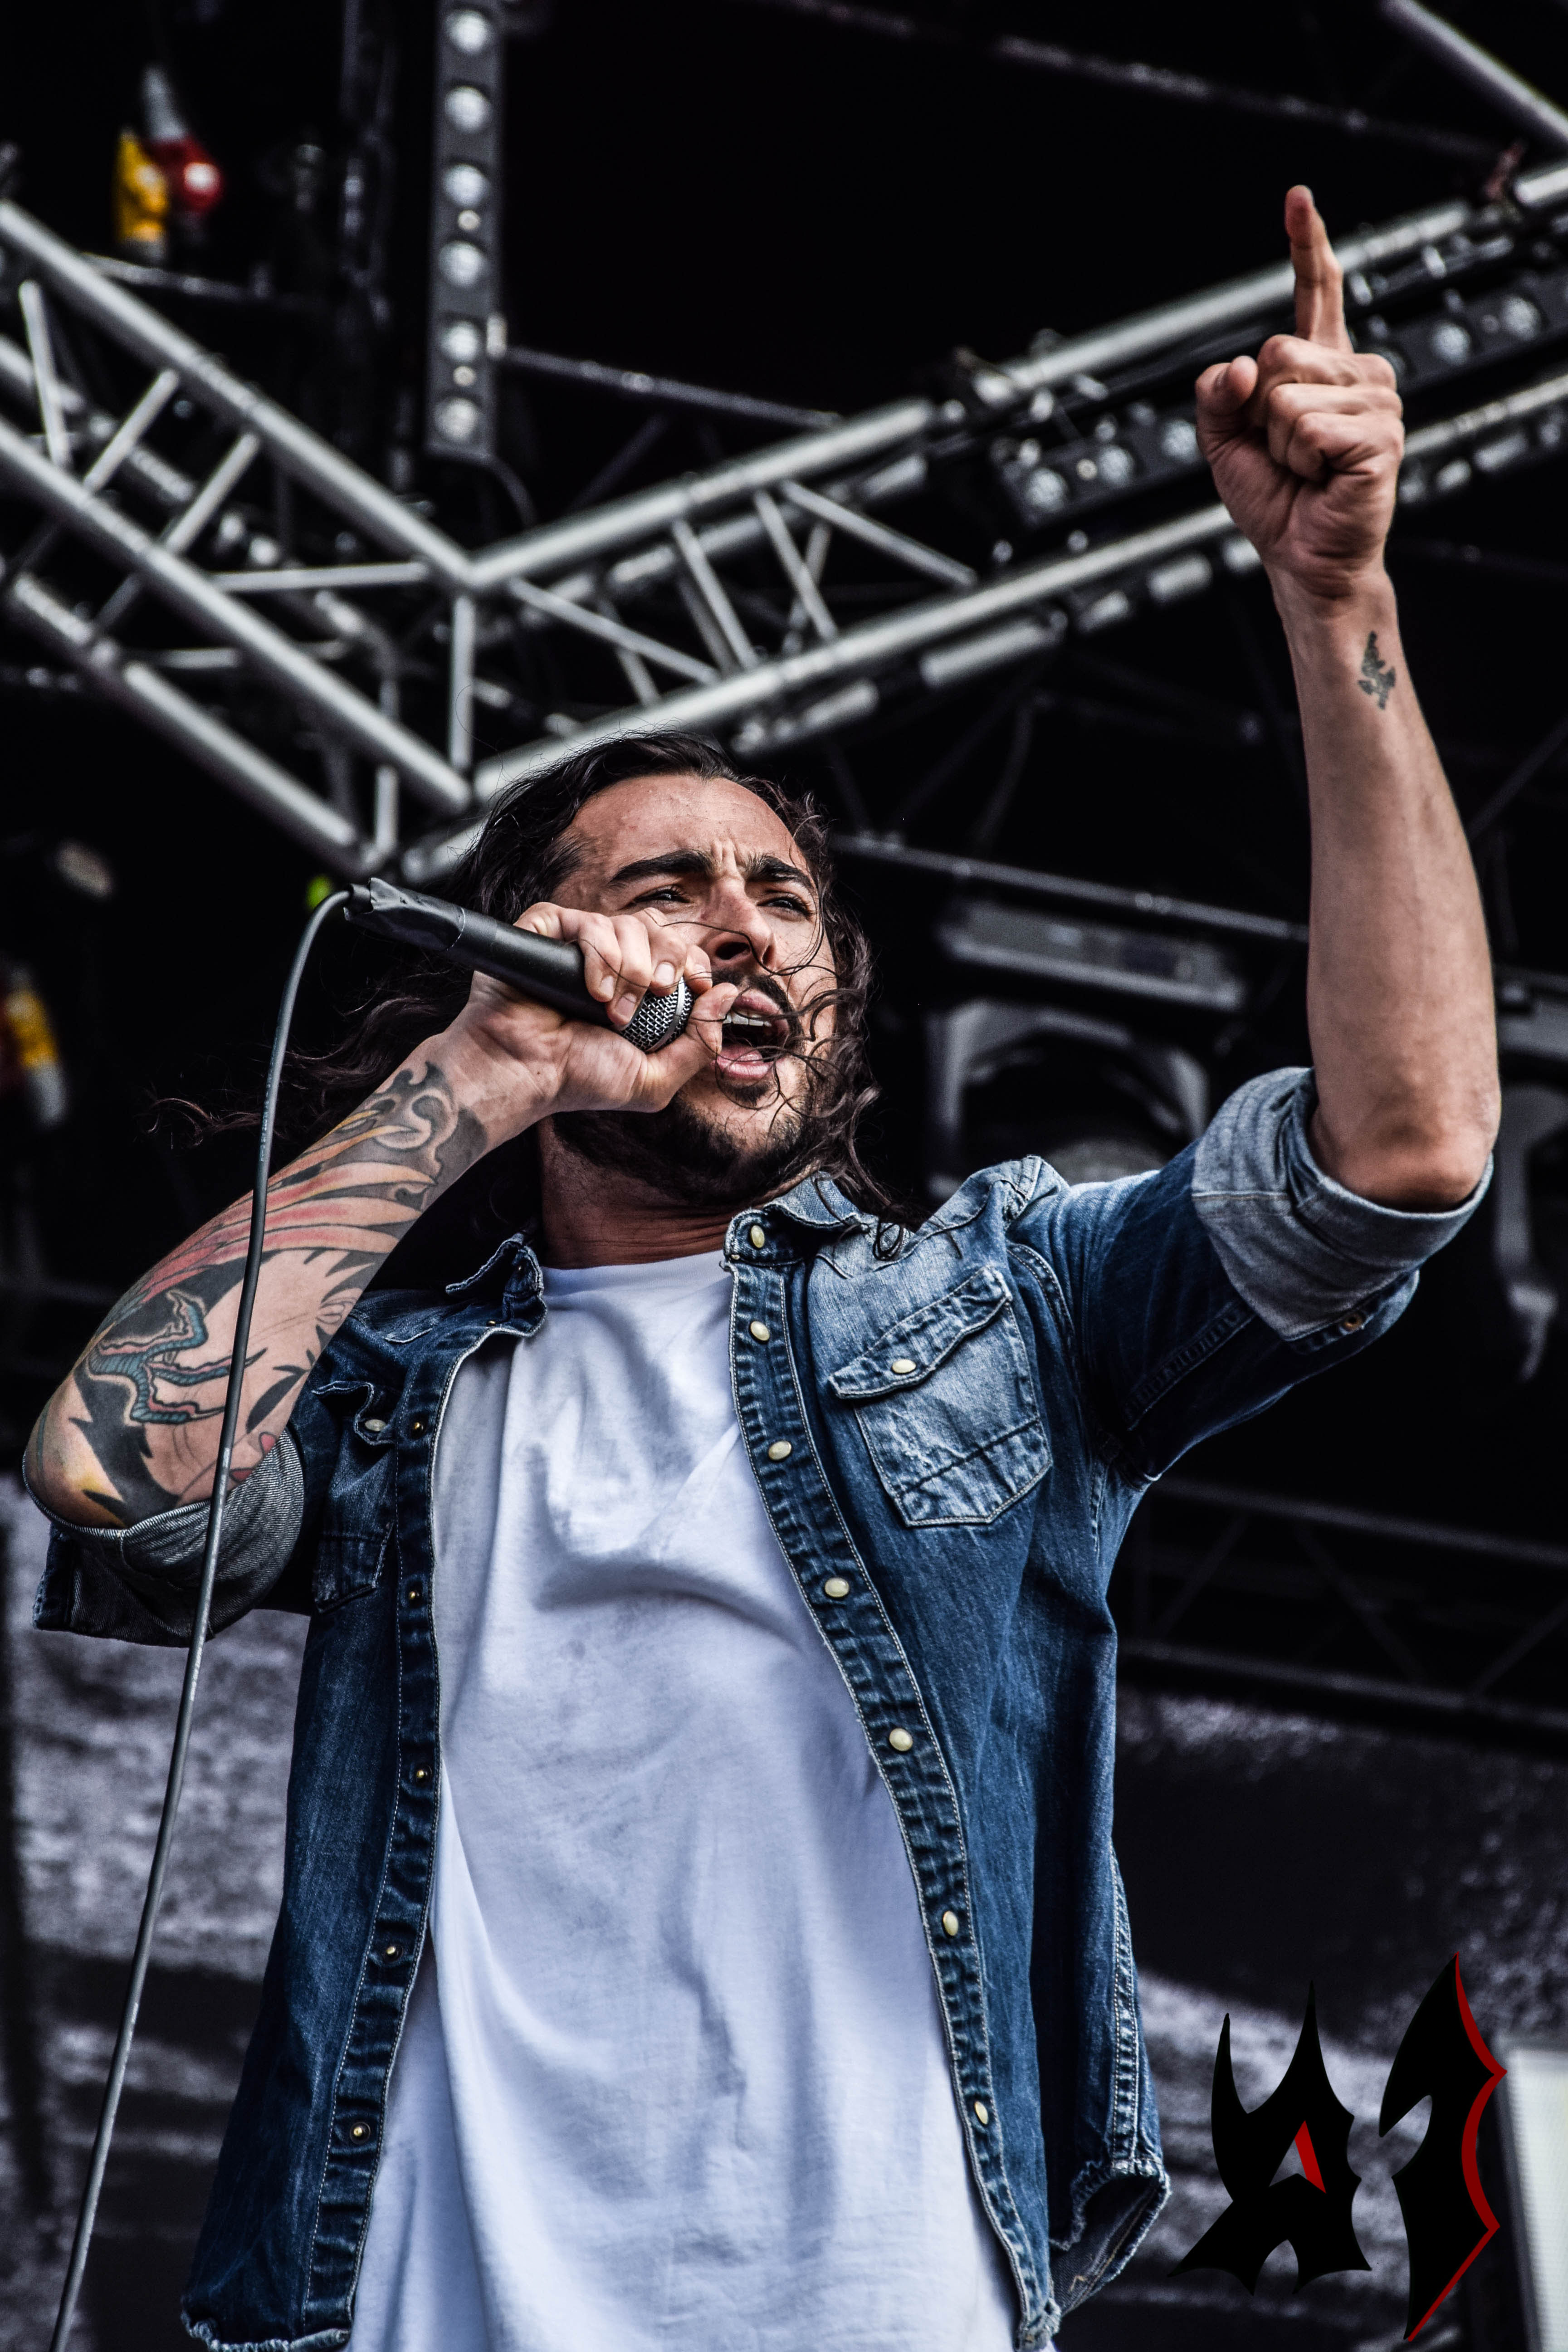 Donwload 2018 – Day 2 - Betraying The Martyrs 19